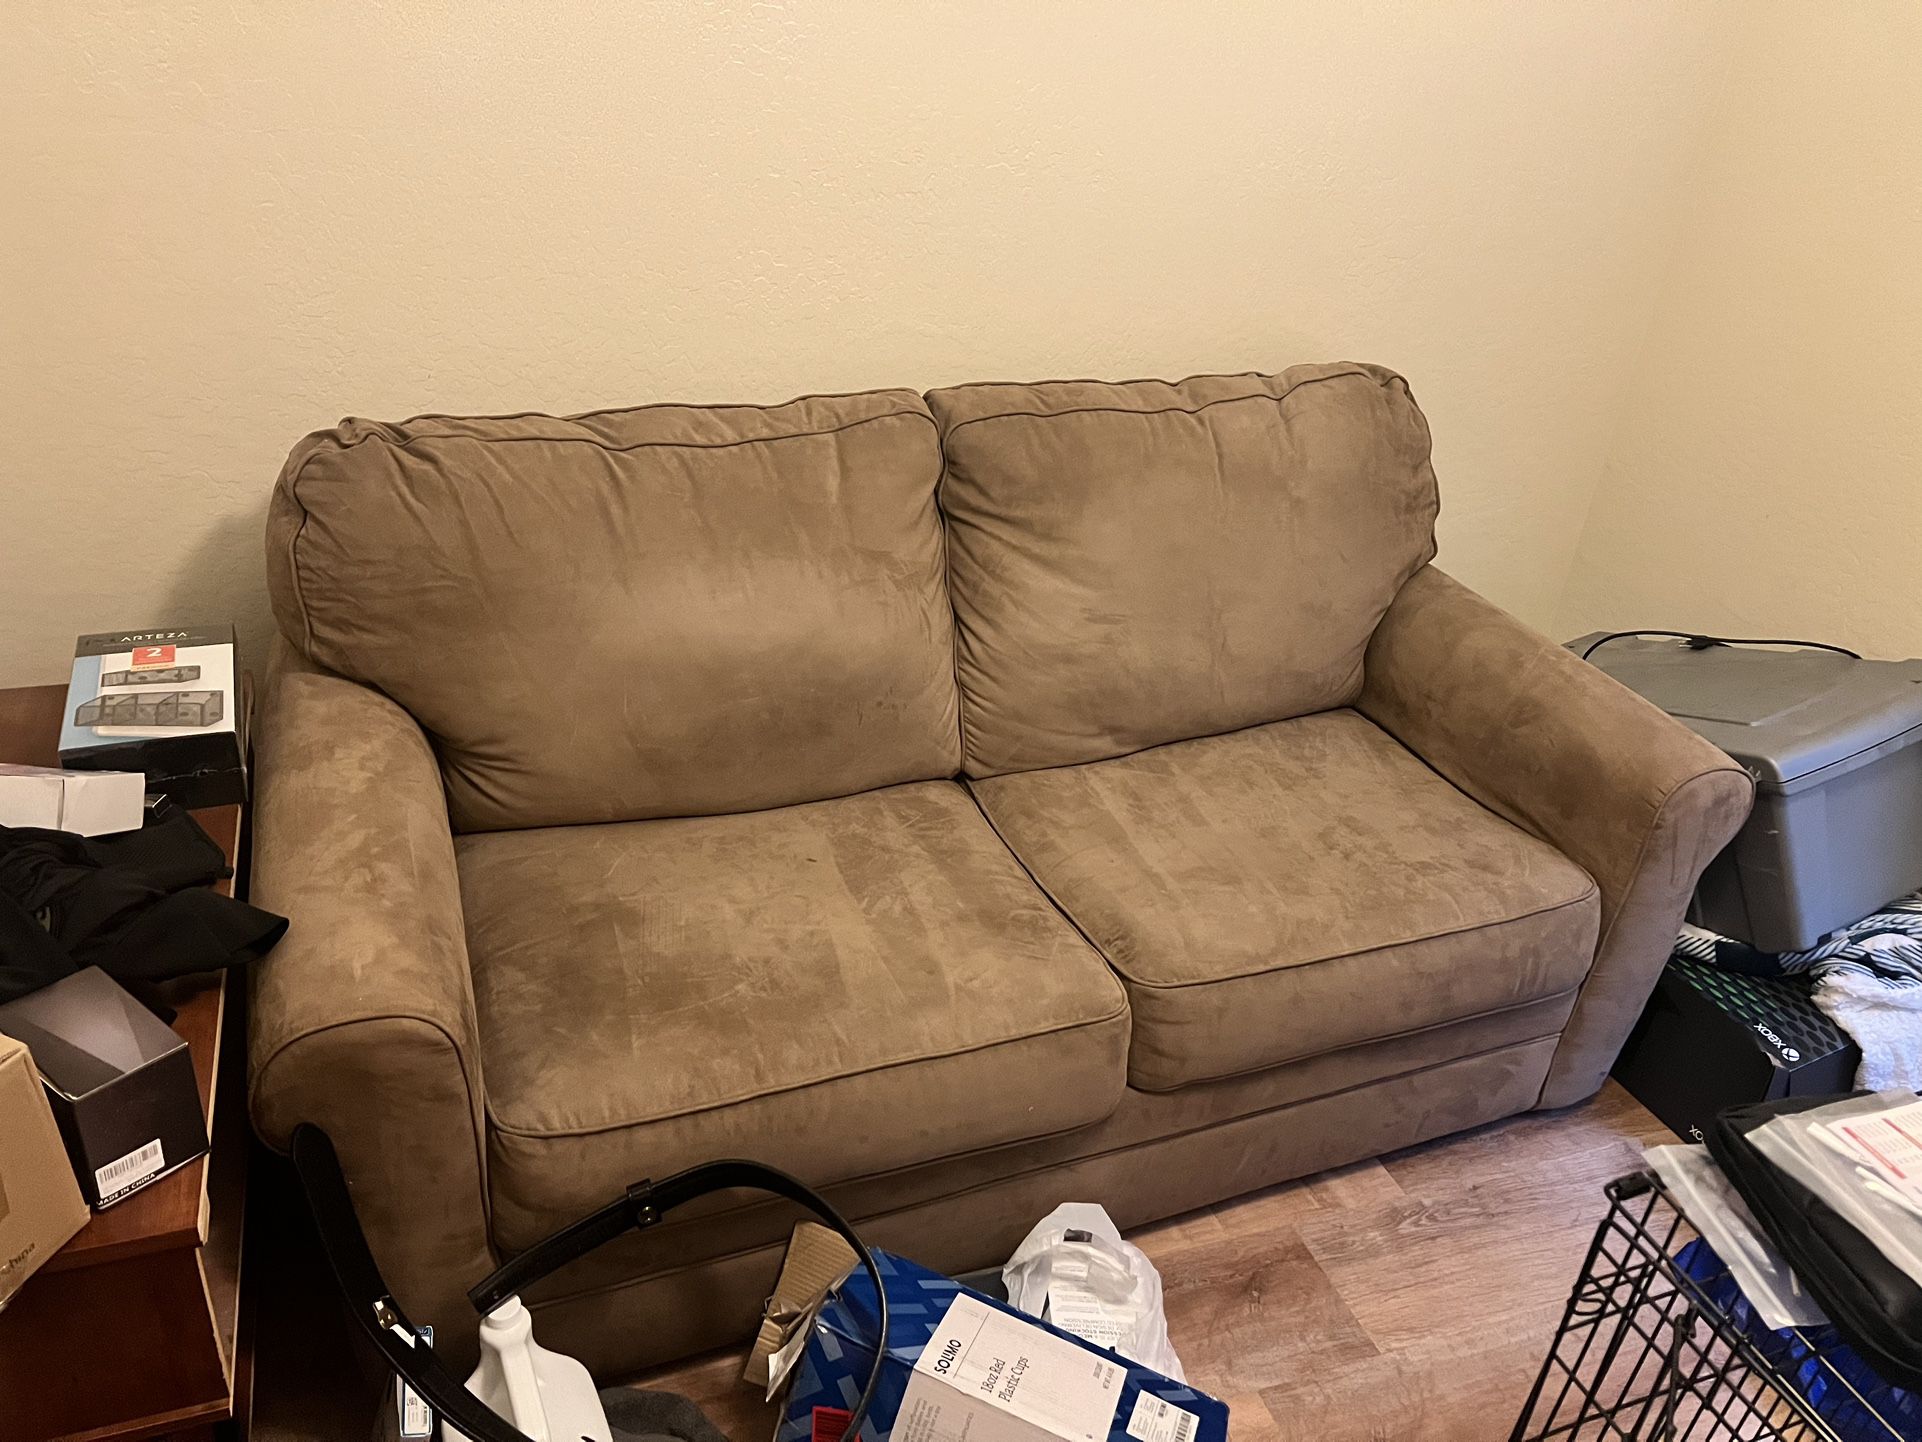 Great Condition Futon Couch 